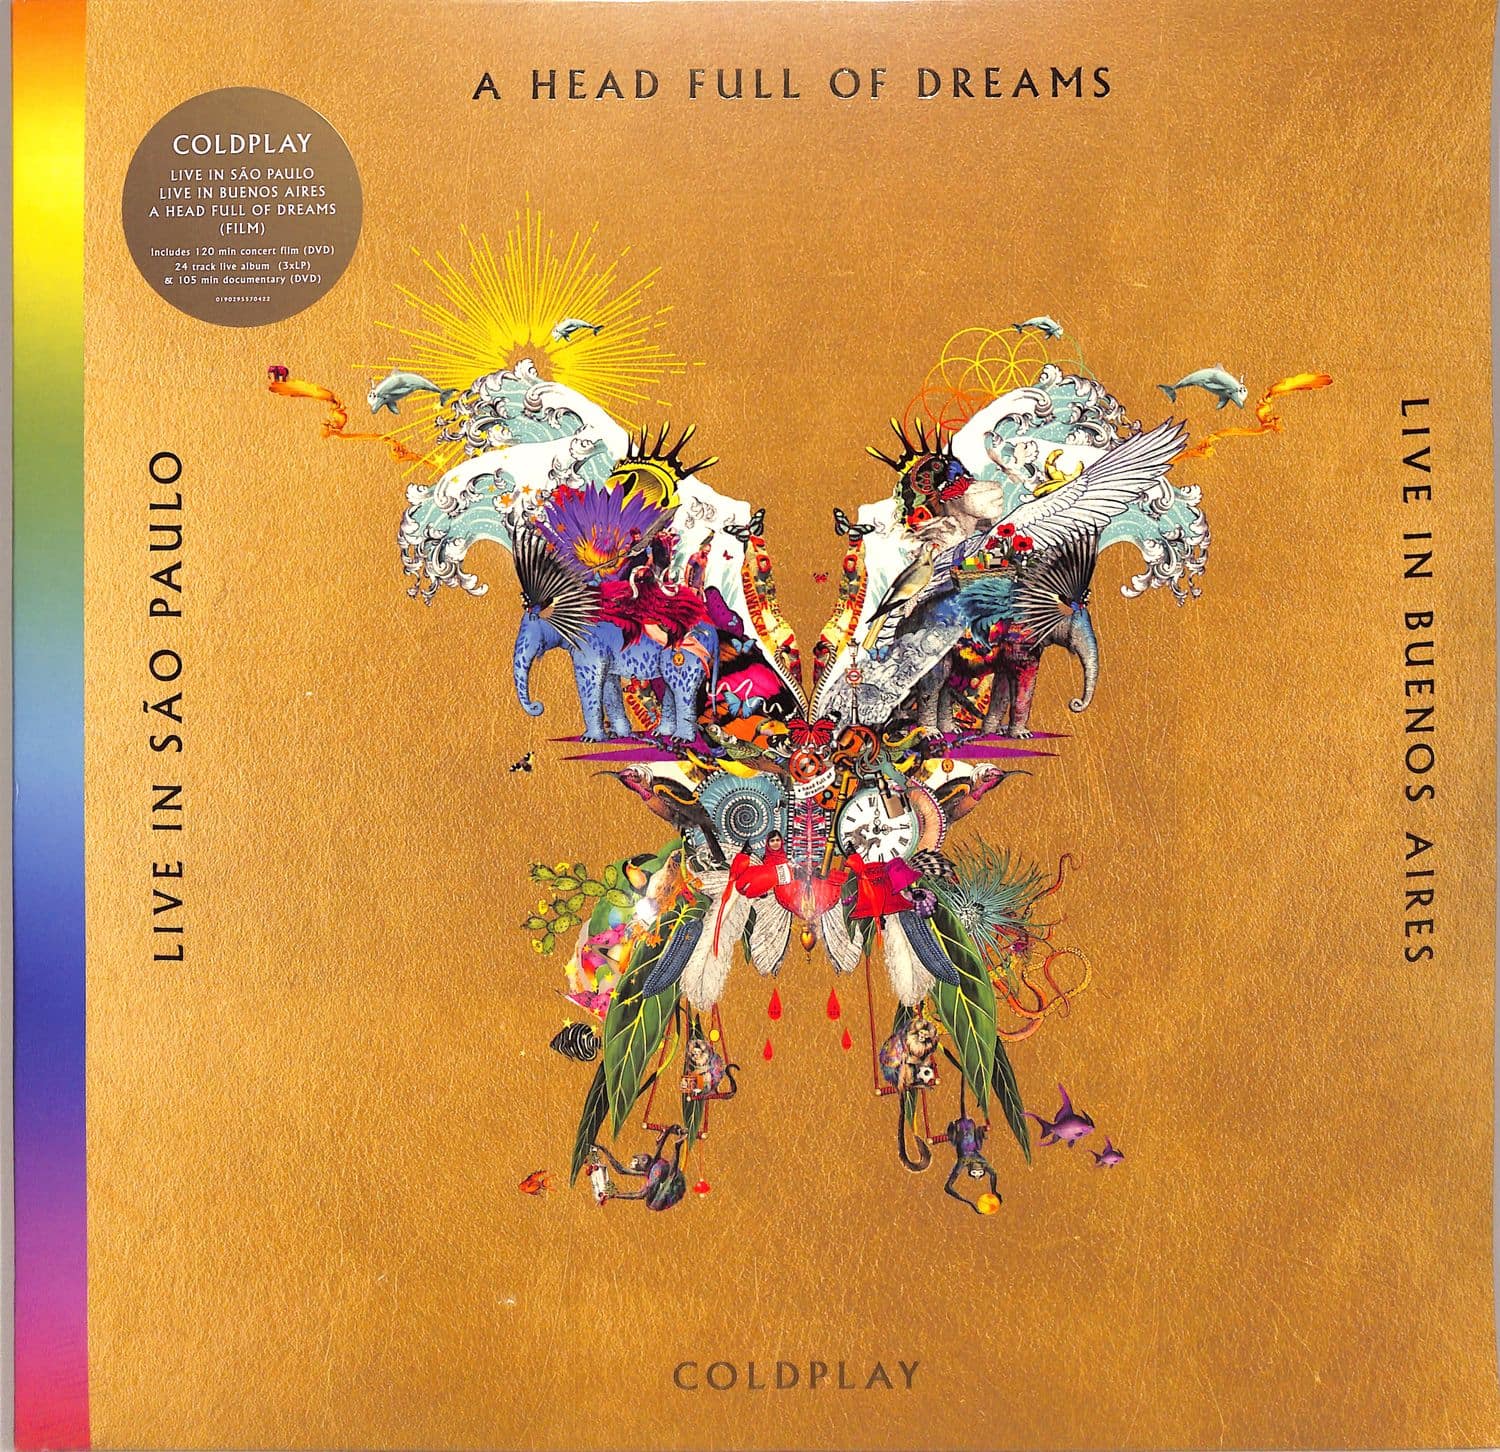 Coldplay - LIVE IN BUENOS AIRES & SAO PAULO / A HEAD FULL OF DREAMS 